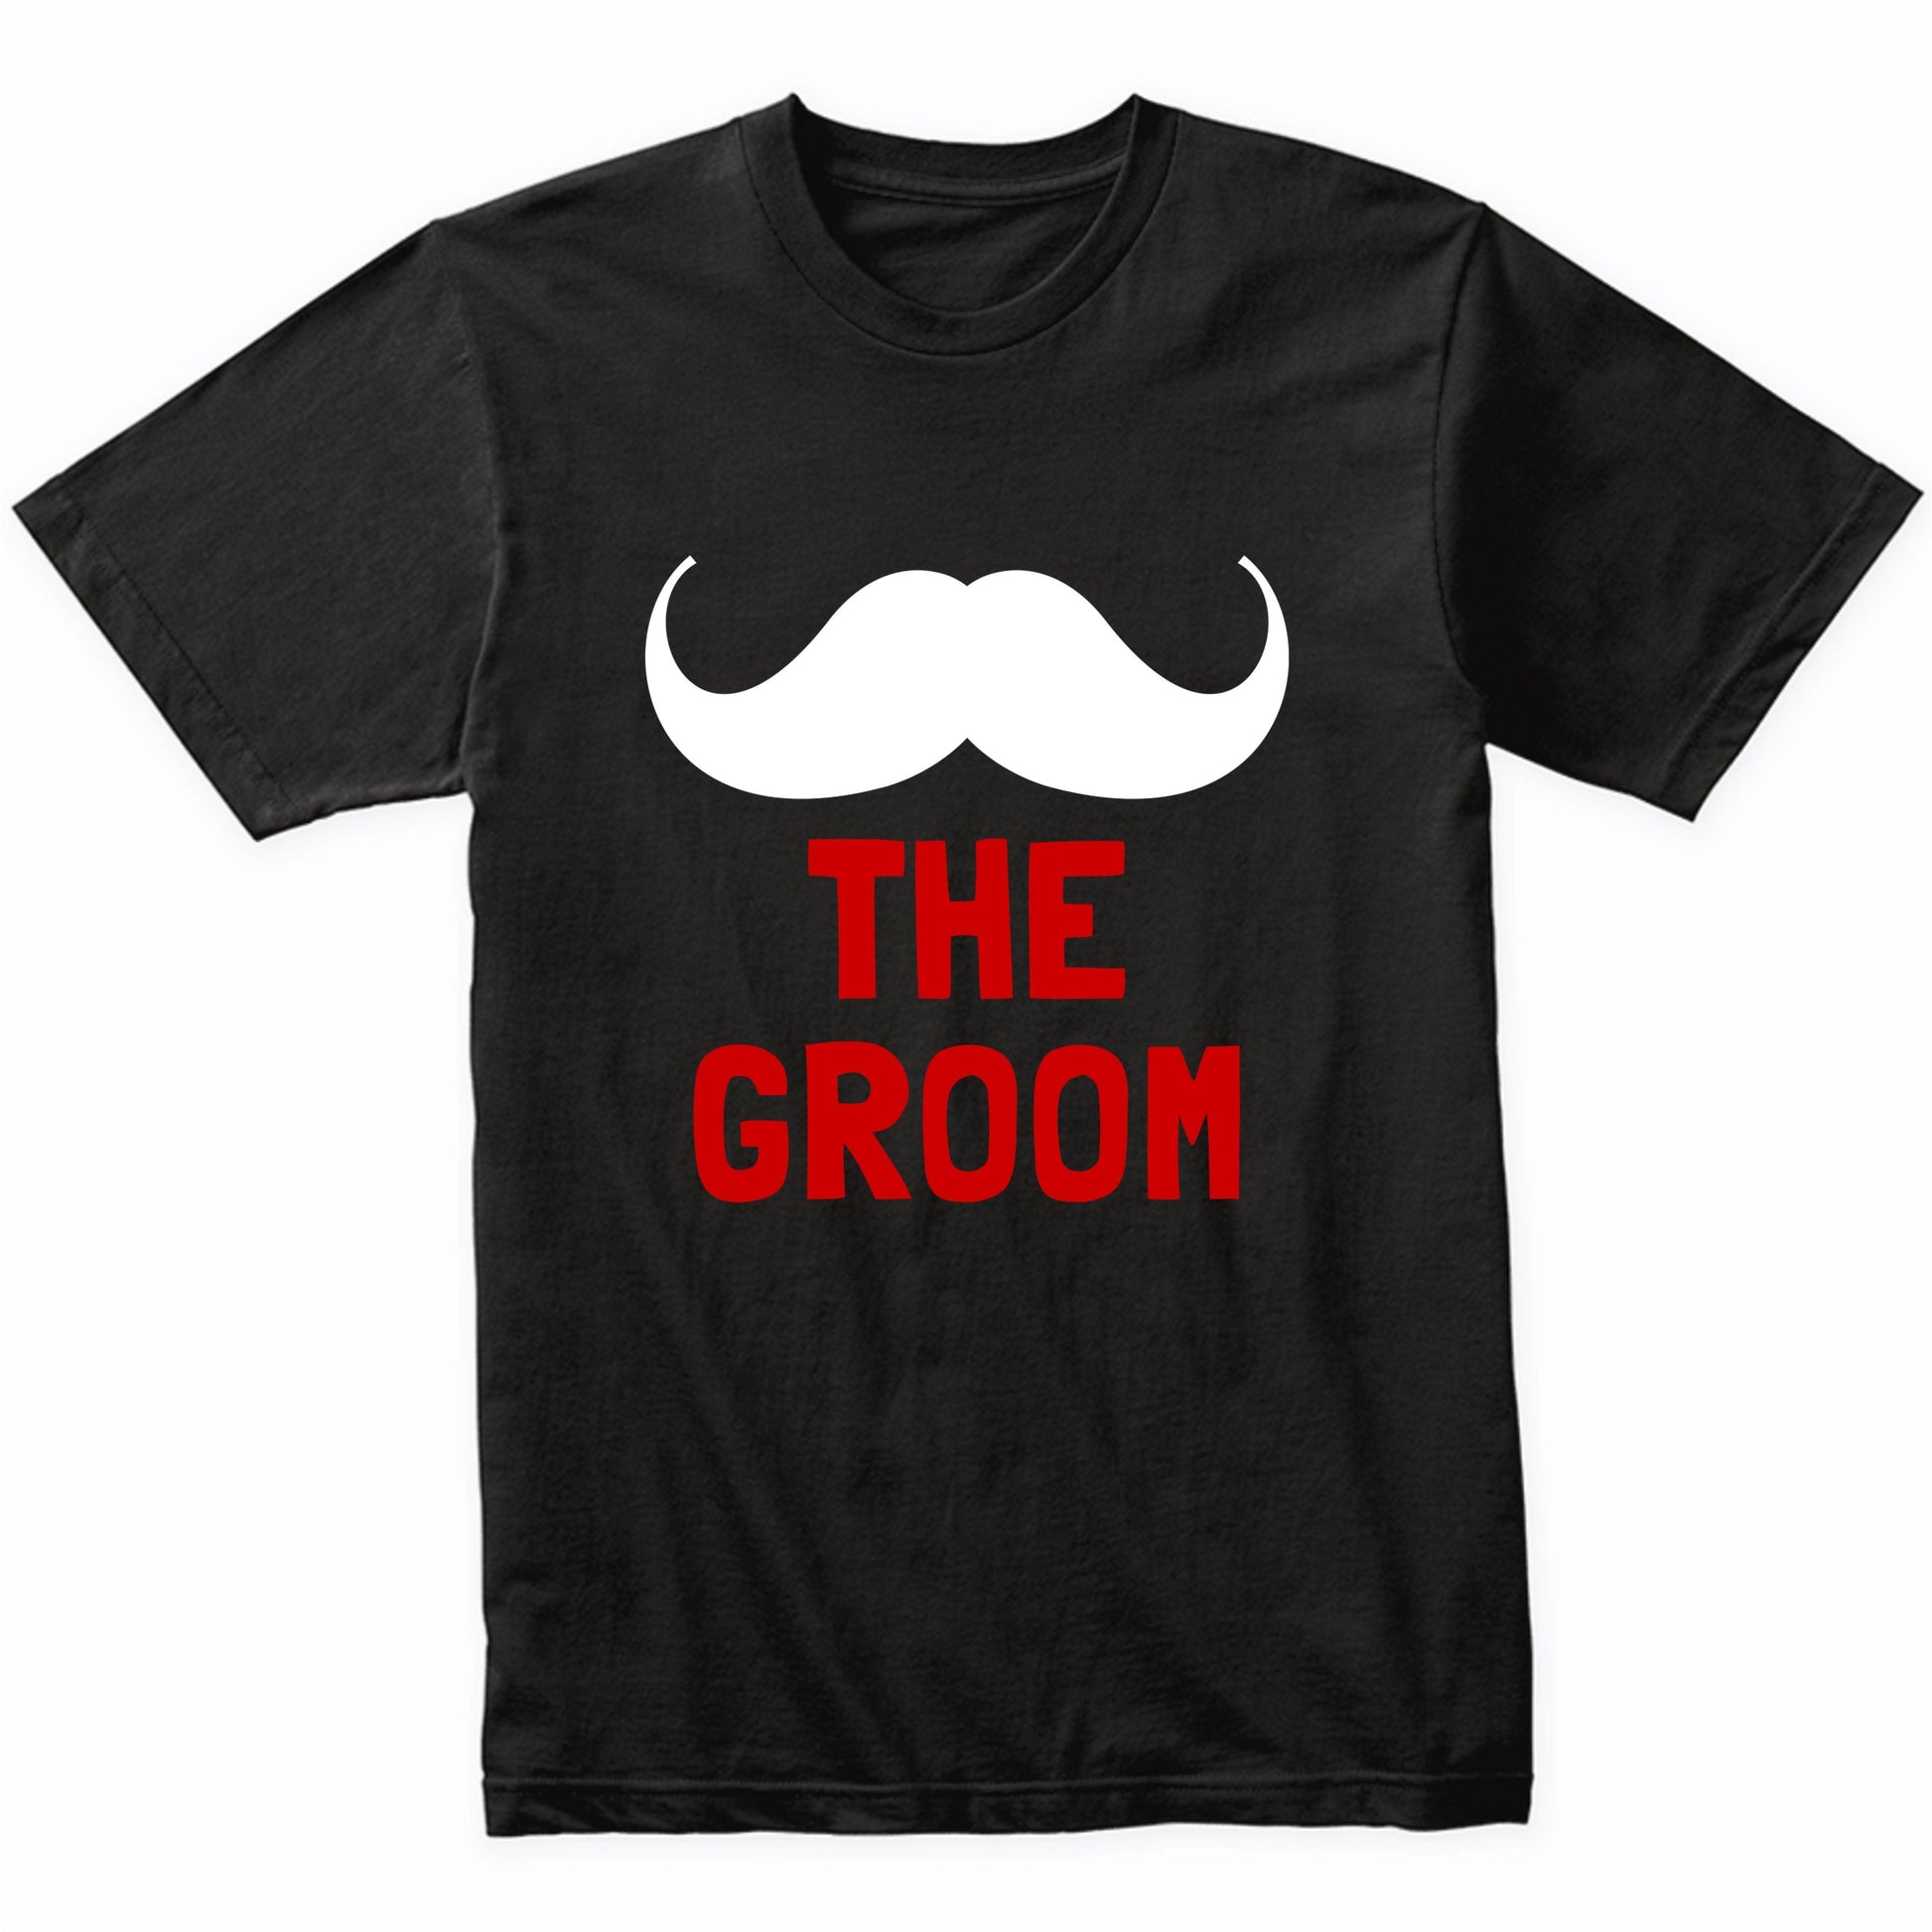 The Groom Shirt - Bachelor Party Wedding Party Mustache T-Shirt